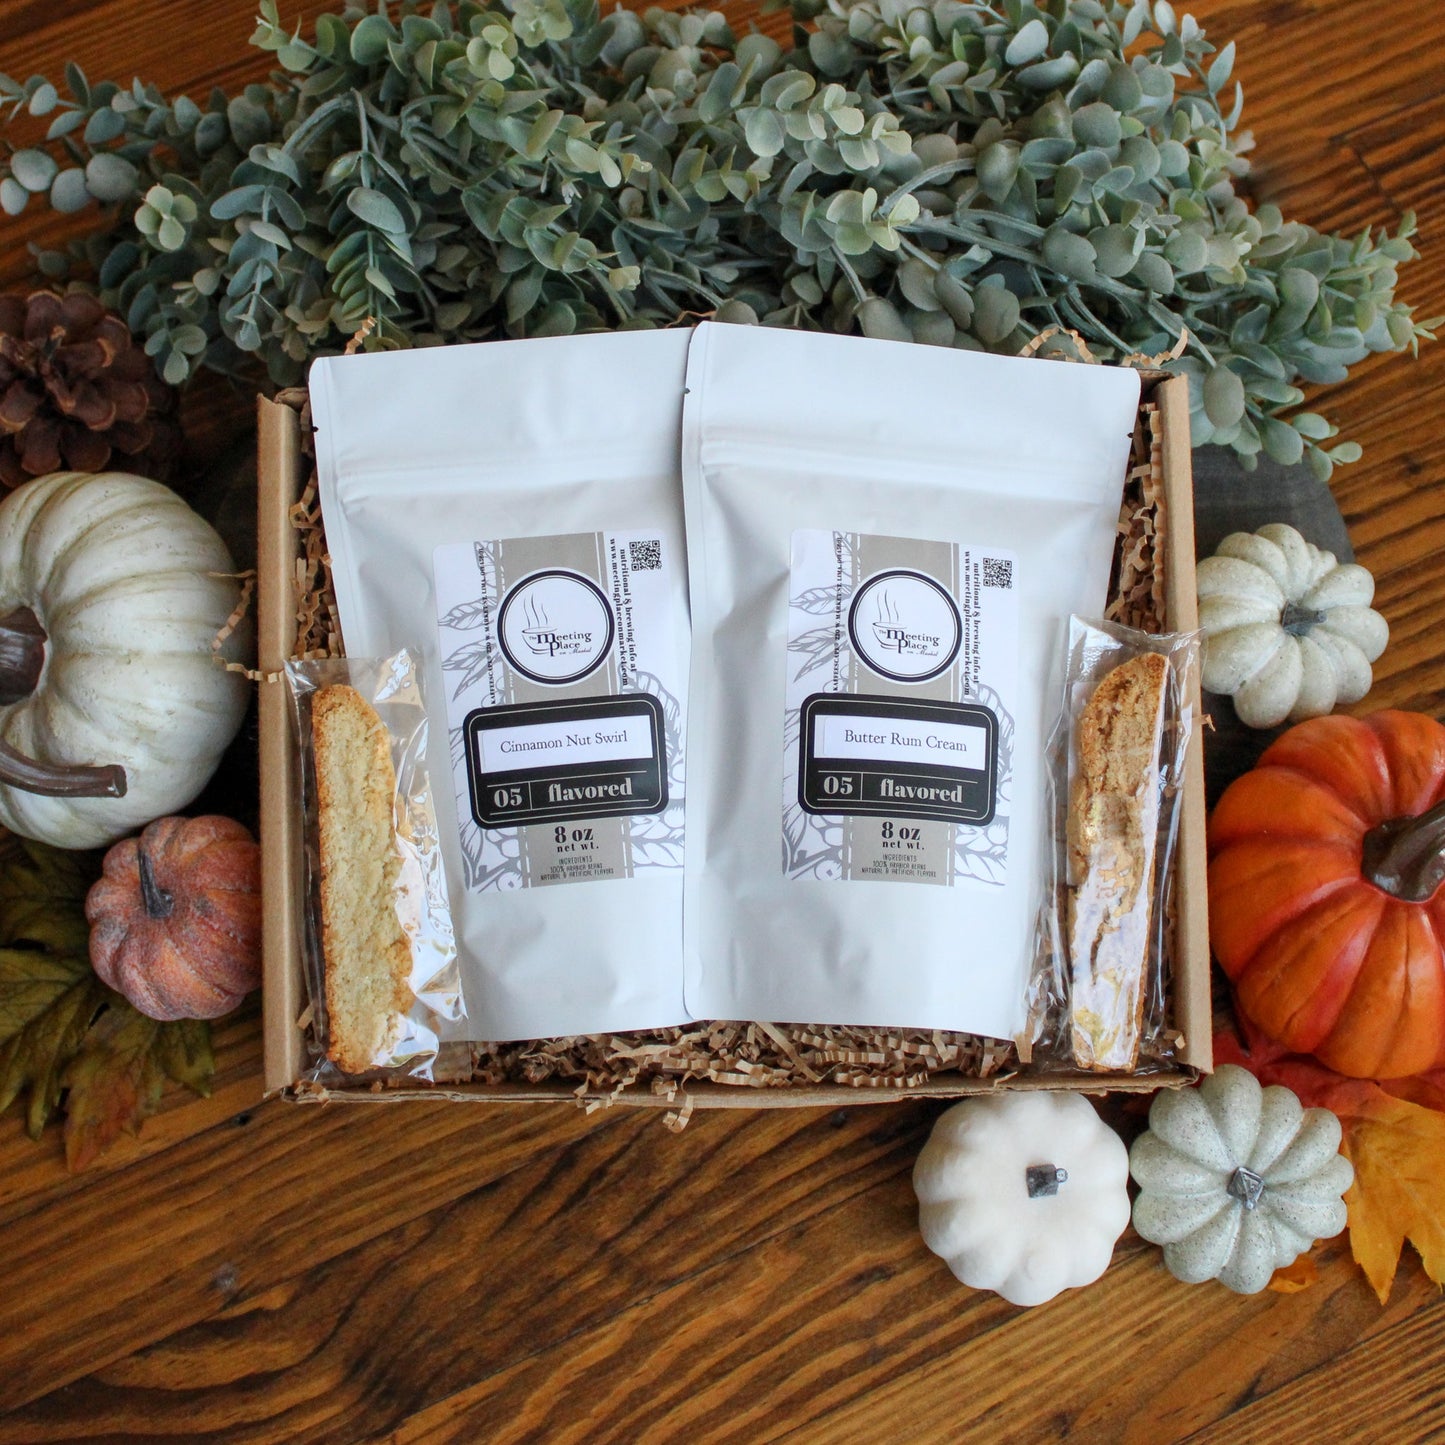 Fall Autumn Coffee Gift Box, Thanksgiving Gift Basket, Pumpkin Spice Coffee Fall / Autumn Gifts - The Meeting Place on Market